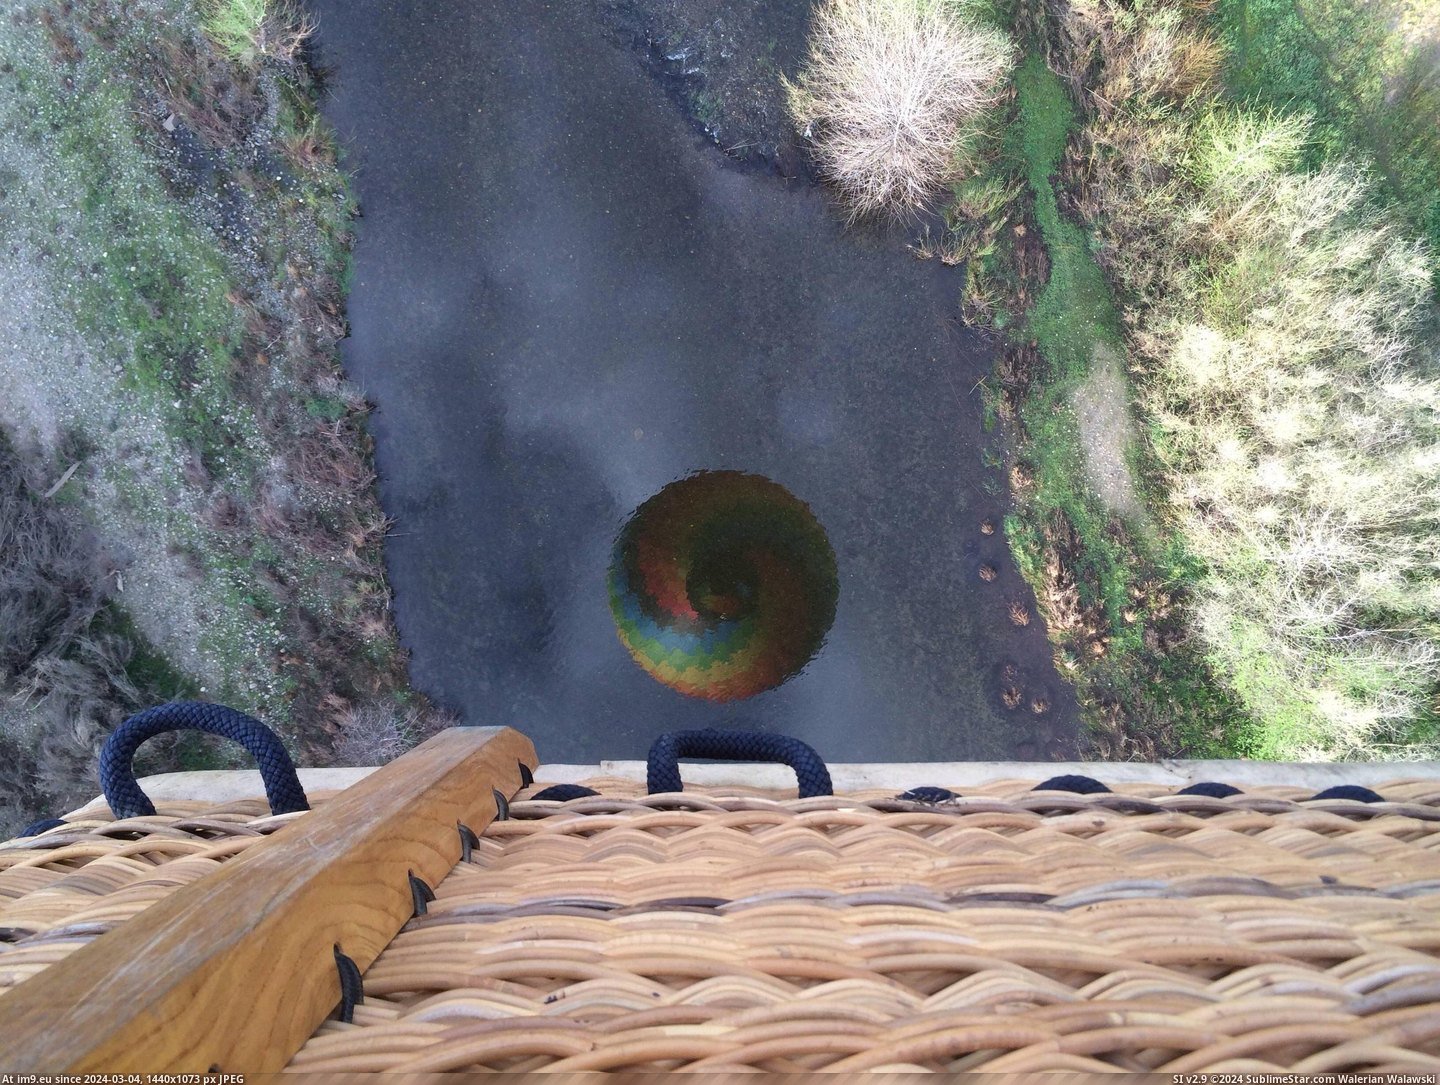 #Hot #Photo #Awesome #Balloon #Bday #Air #Creek #Reflection [Pics] GF took this awesome photo today while we went hot air ballooning for my bday. Reflection of our balloon of a creek we fl Pic. (Image of album My r/PICS favs))